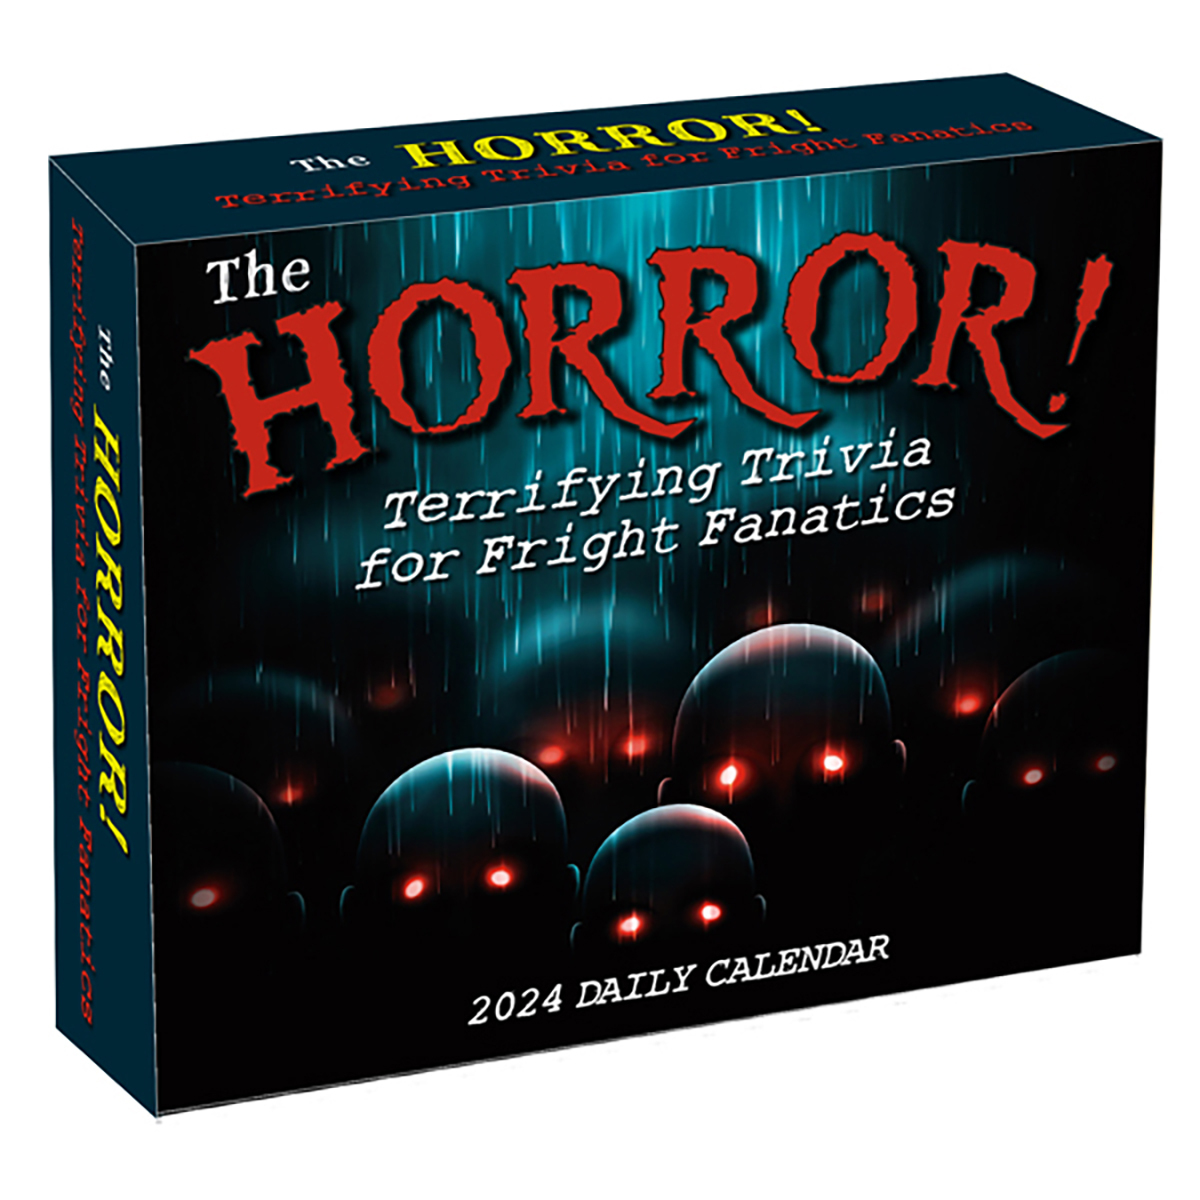 The Horror 2024 Daily Boxed Calendar by Susie Shubert